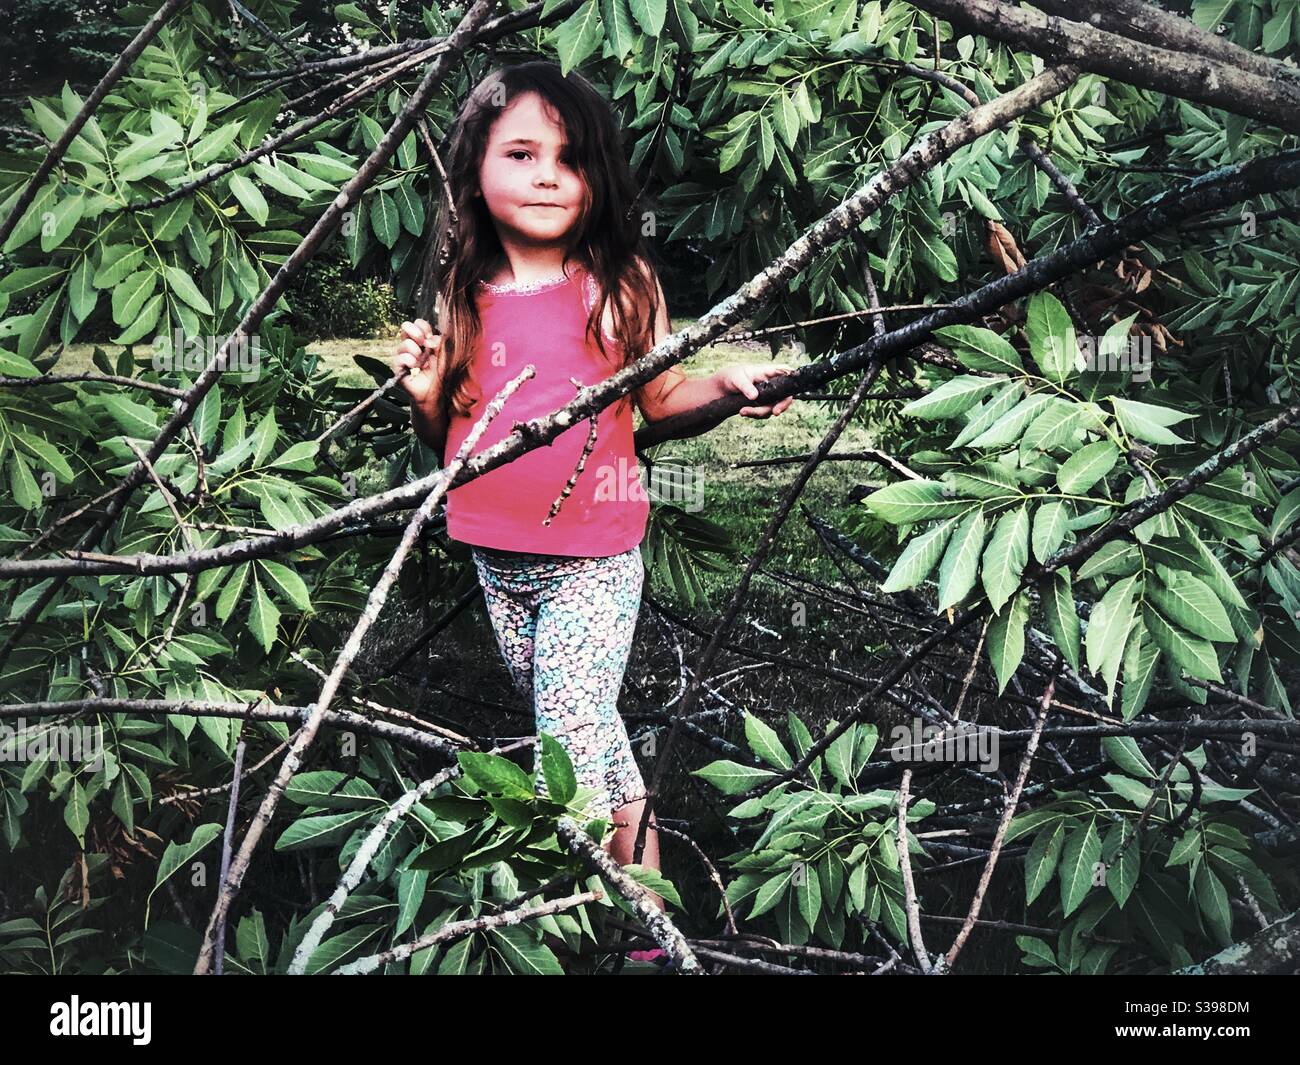 Young girl standing in tree branches Stock Photo